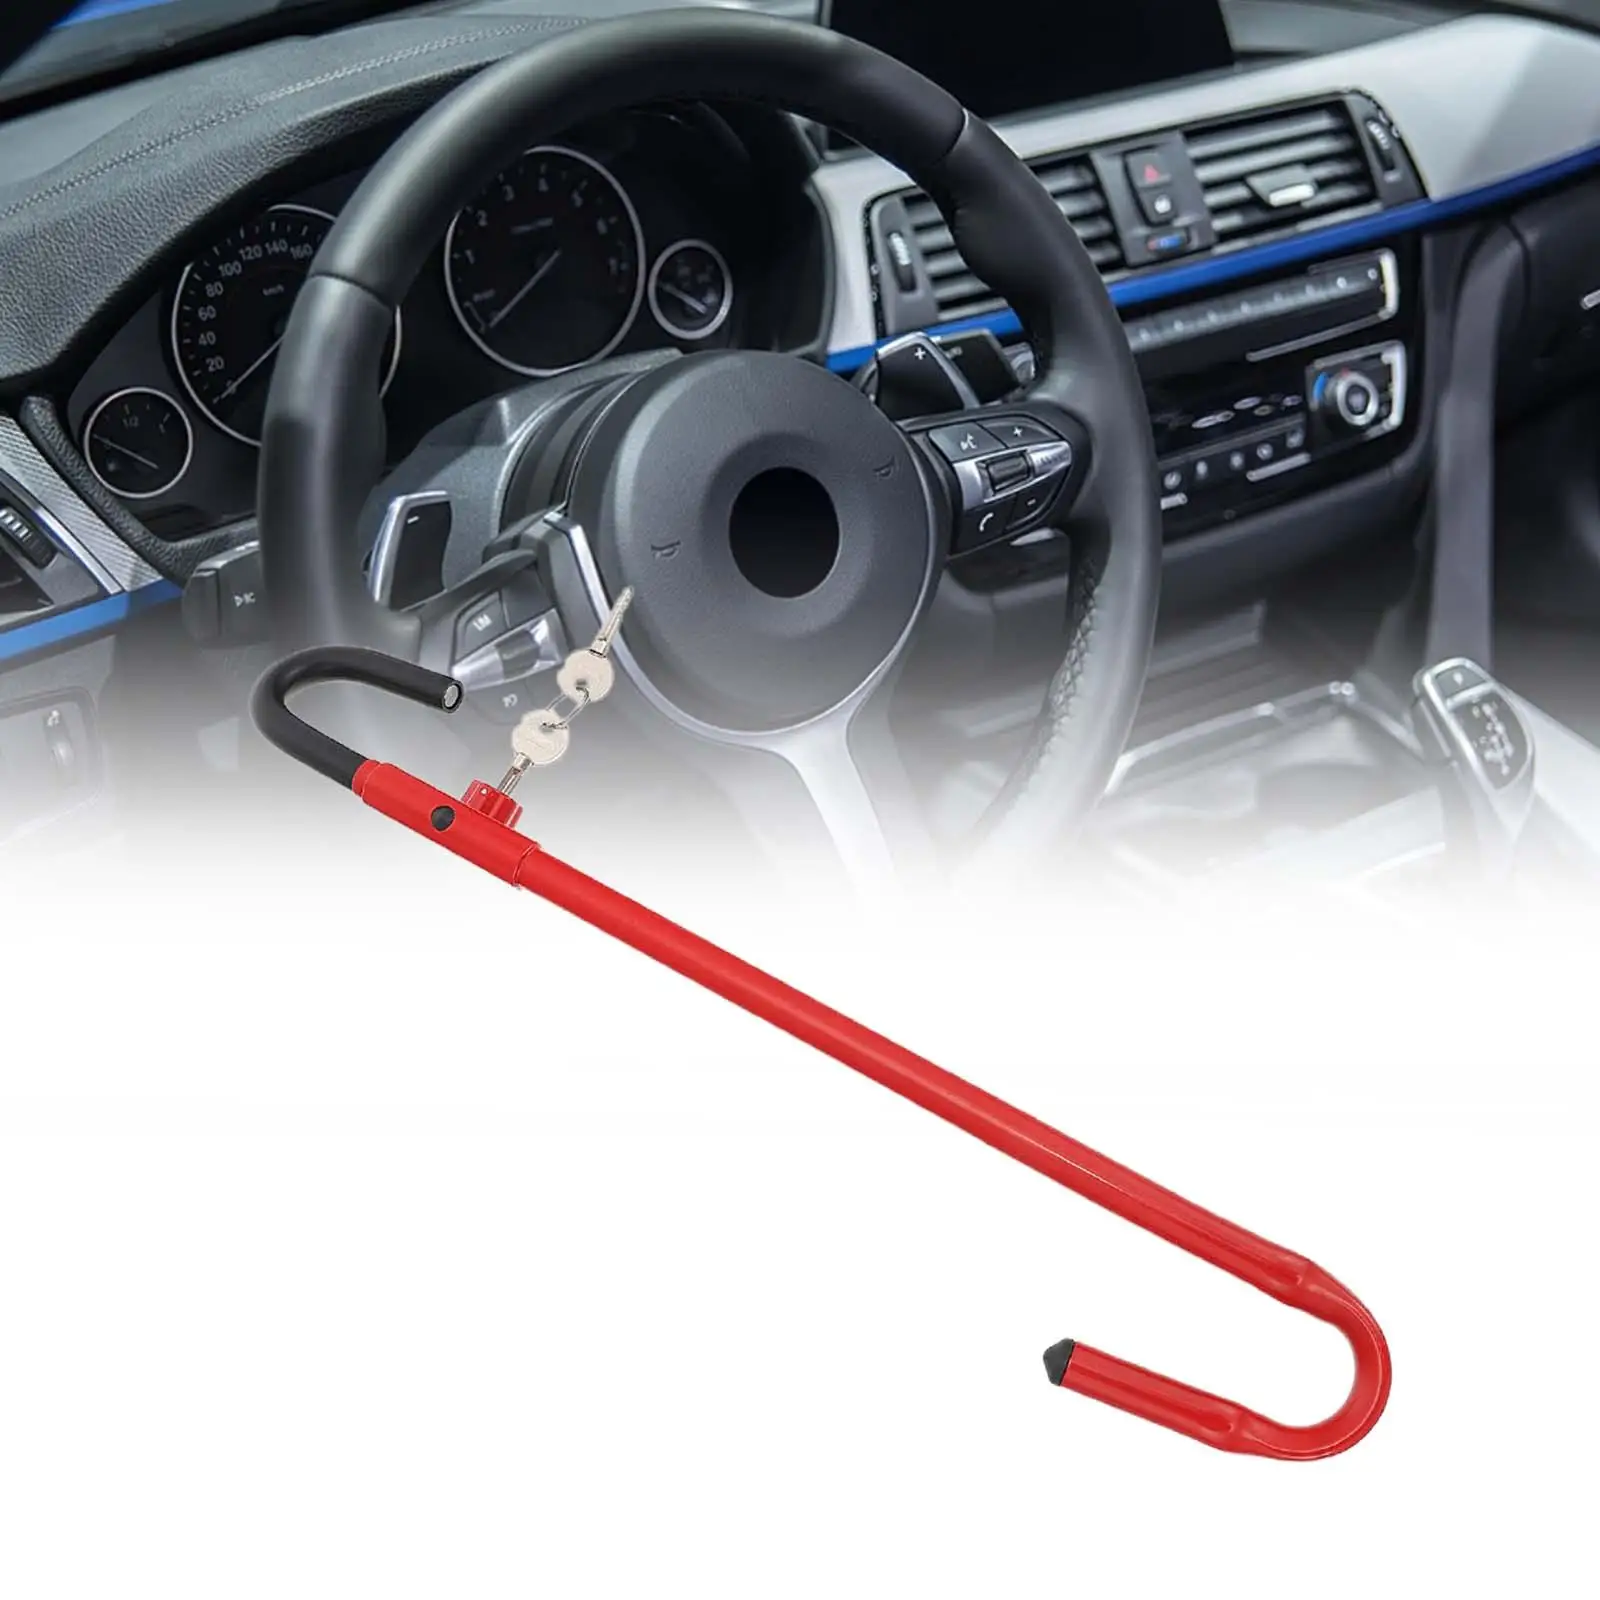 Car Steering Wheel to Brake Pedal Lock with 2 Keys Heavy Duty Sturdy Accessories Vehicle Locking Device for Automobile Car